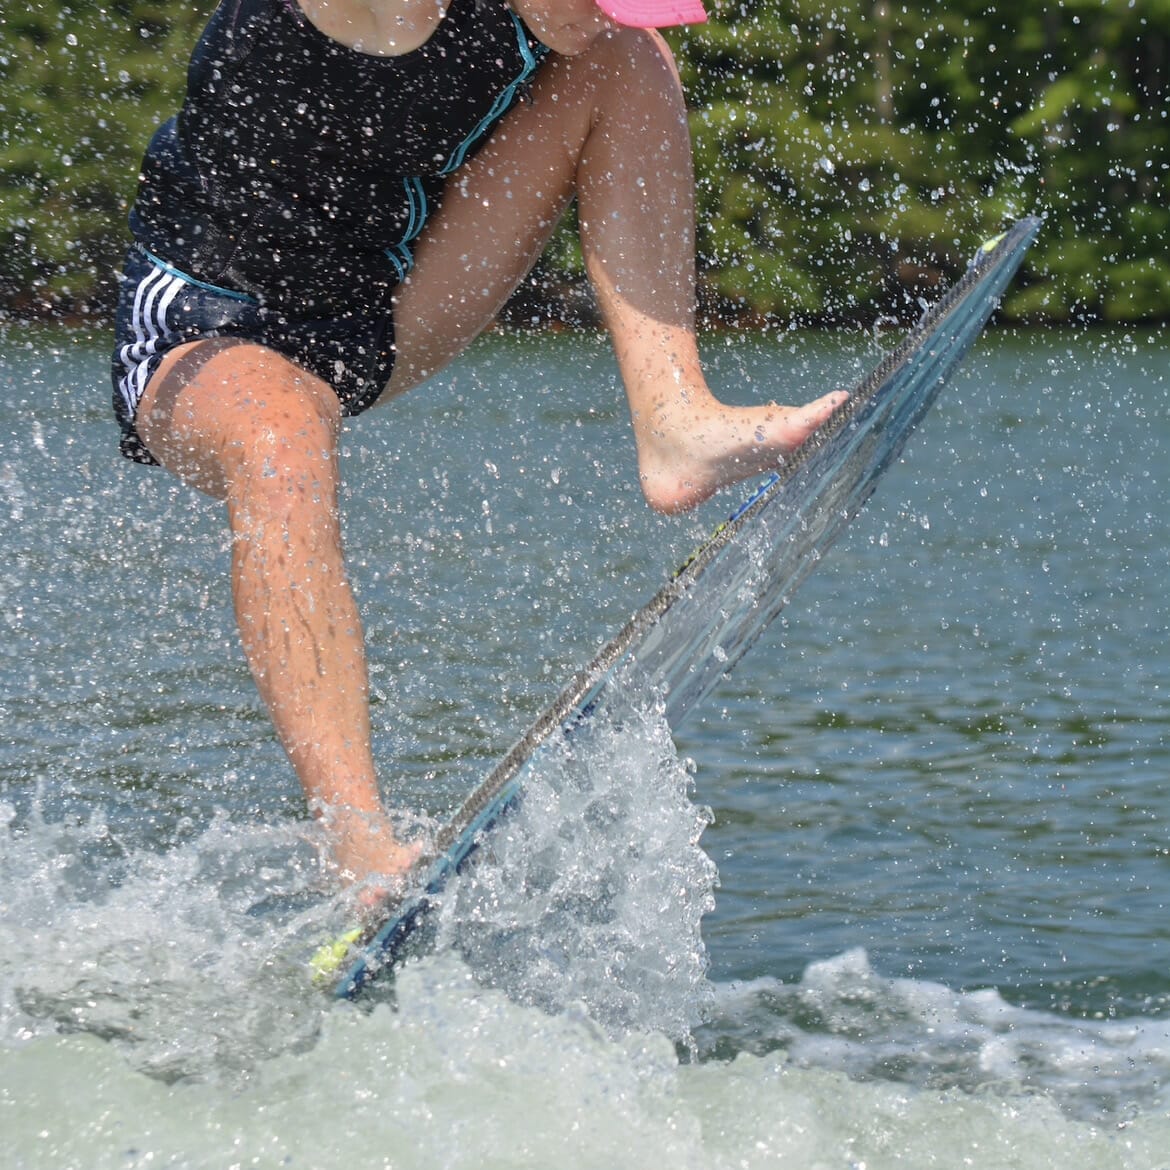 A woman is riding a wave on a wakesurf board.